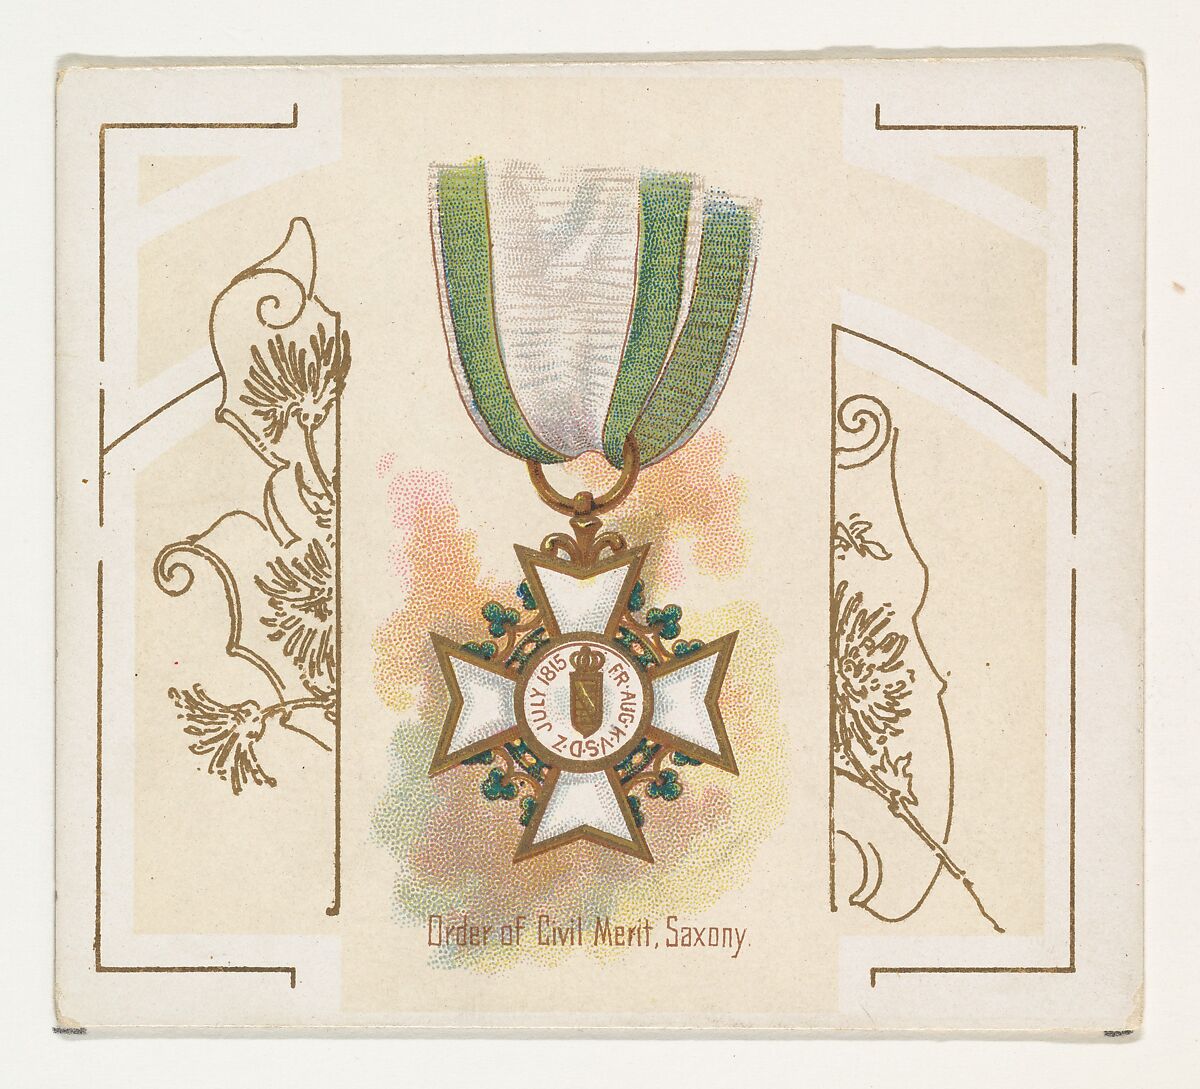 Order of Civil Merit, Saxony, from the World's Decorations series (N44) for Allen & Ginter Cigarettes, Issued by Allen &amp; Ginter (American, Richmond, Virginia), Commercial color lithograph 